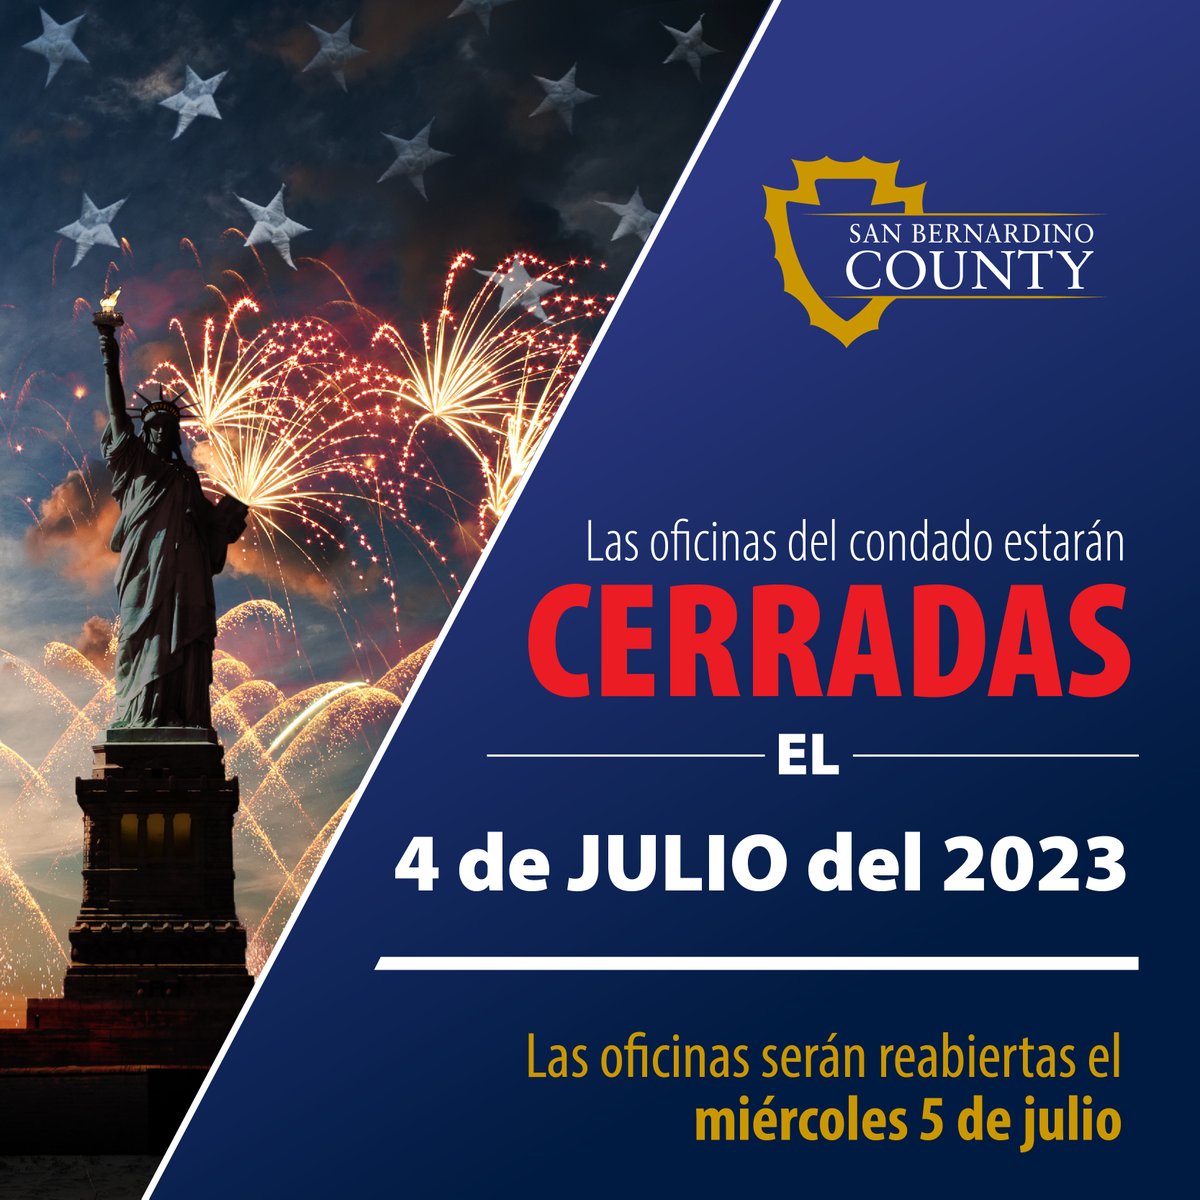 County offices will be closed Tuesday, July 4. Offices will reopen on Wednesday, July 5. ARMC’s Emergency Room remains open 24/7 for your urgent medical needs. #TheHeartofaHealthyCommunity